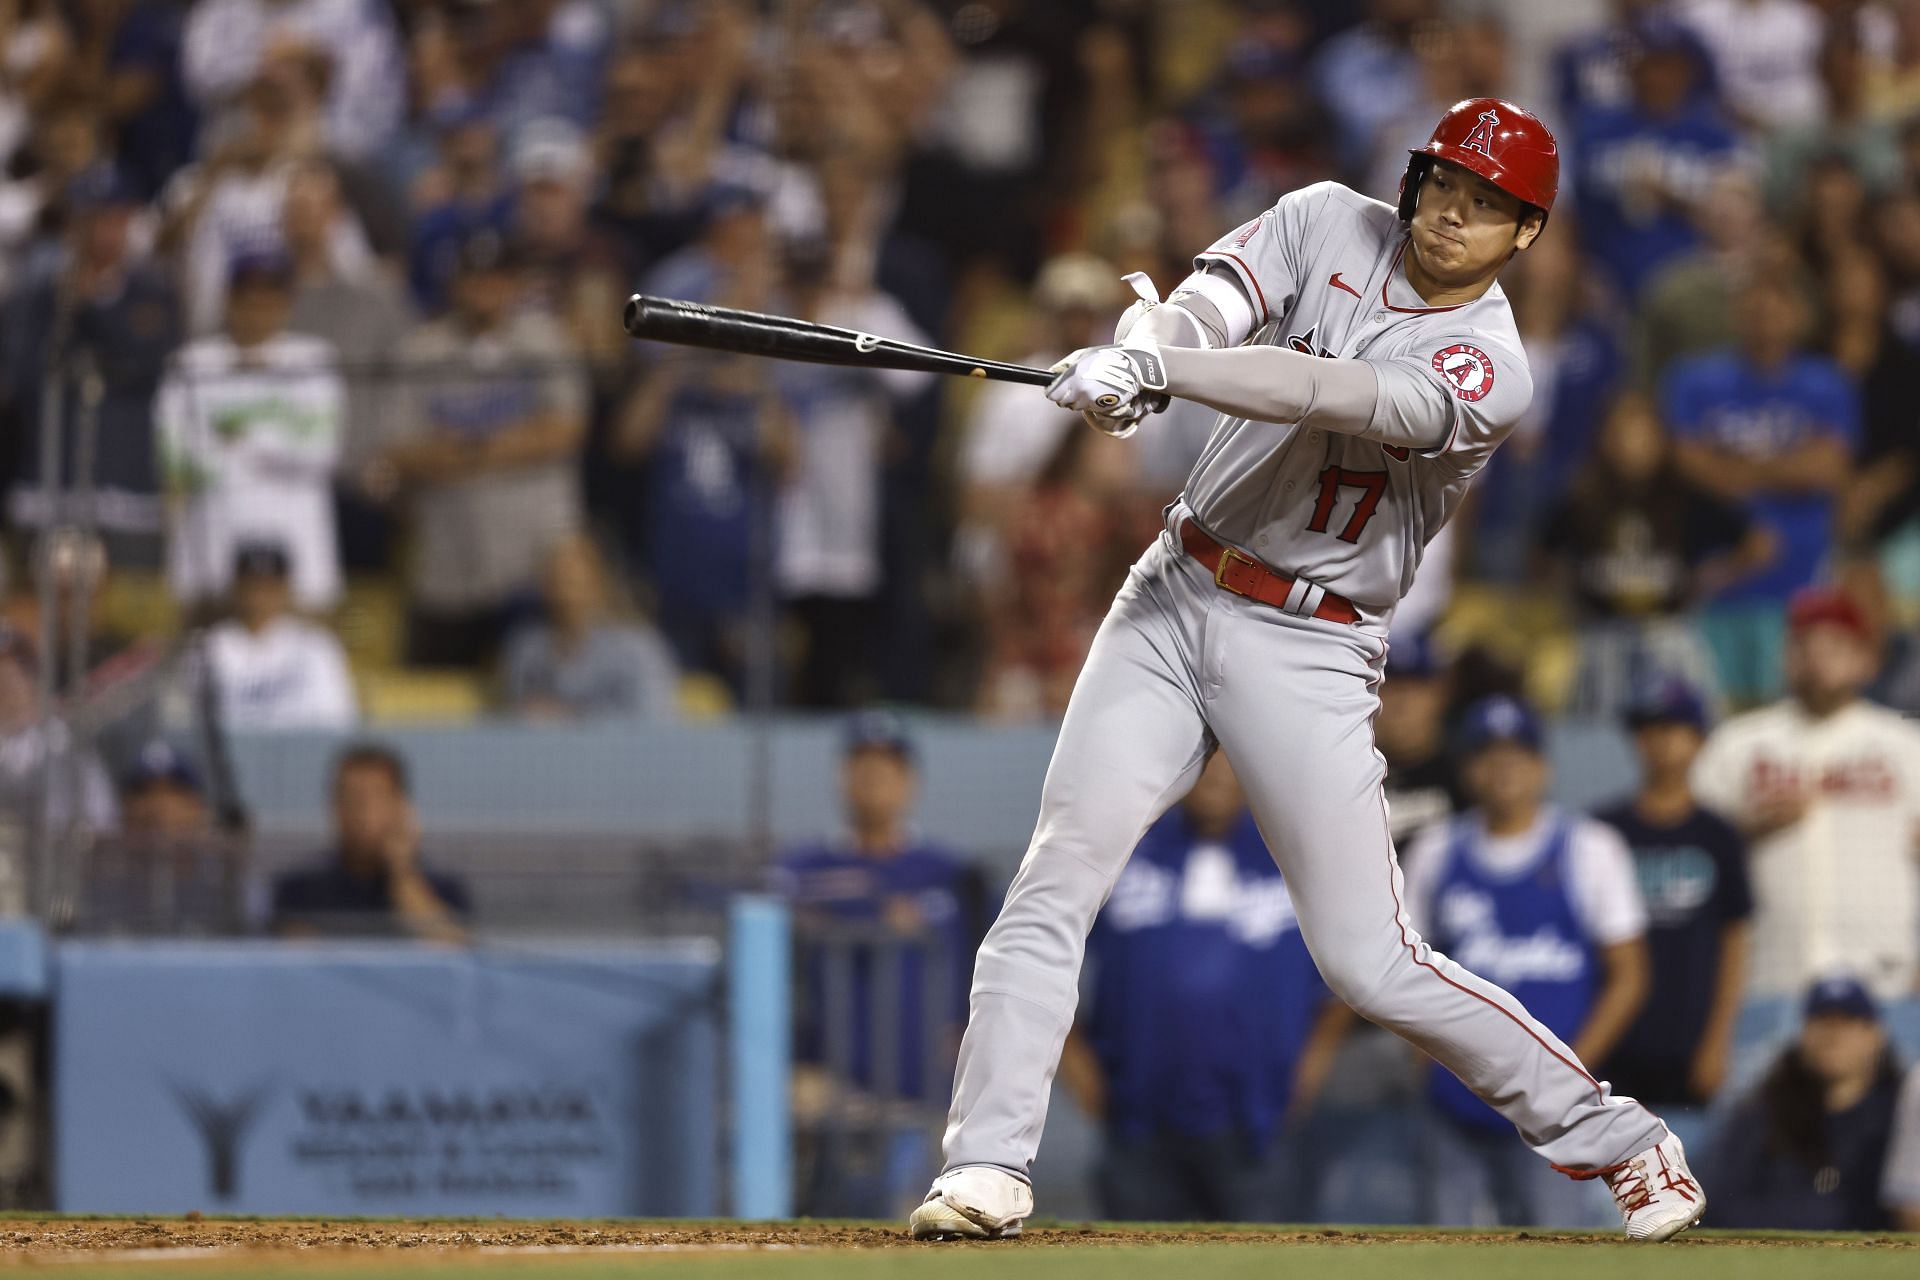 Could Ohtani move cross-town to the Los Angeles Dodgers?